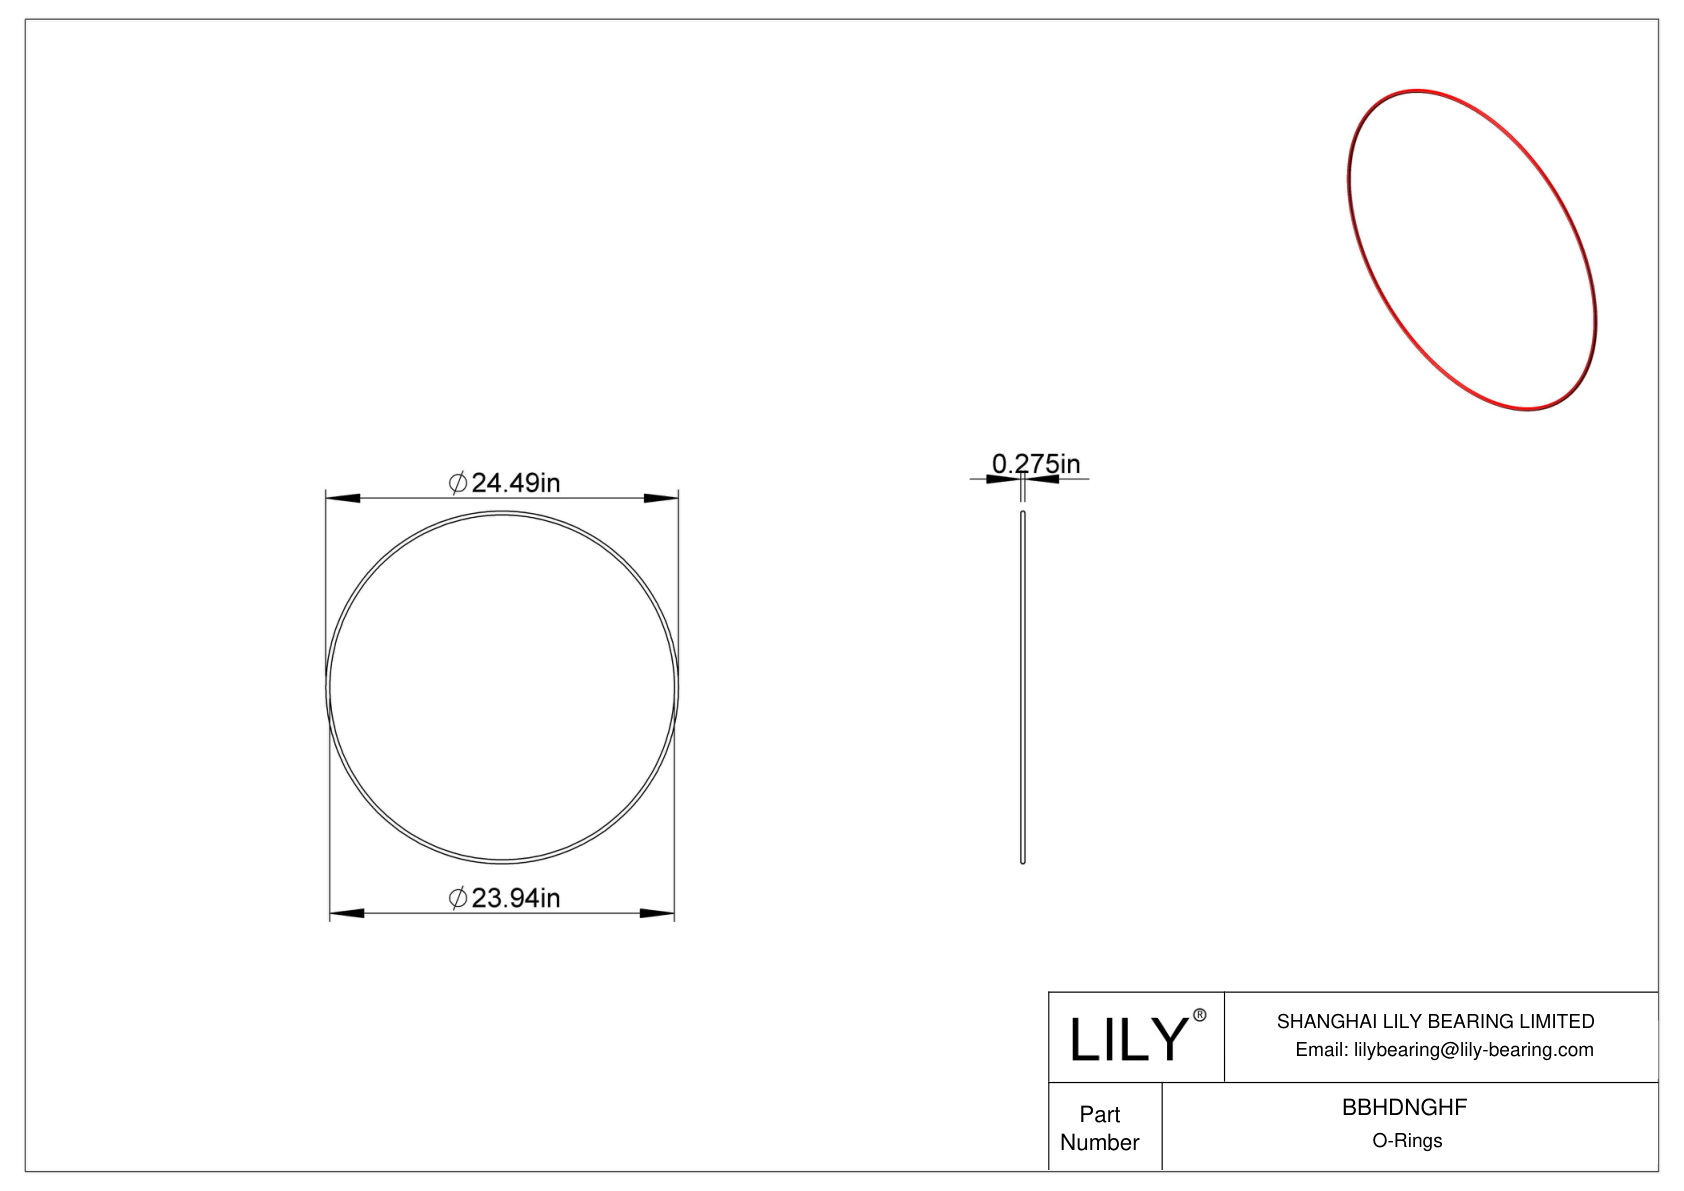 BBHDNGHF High Temperature O-Rings Round cad drawing